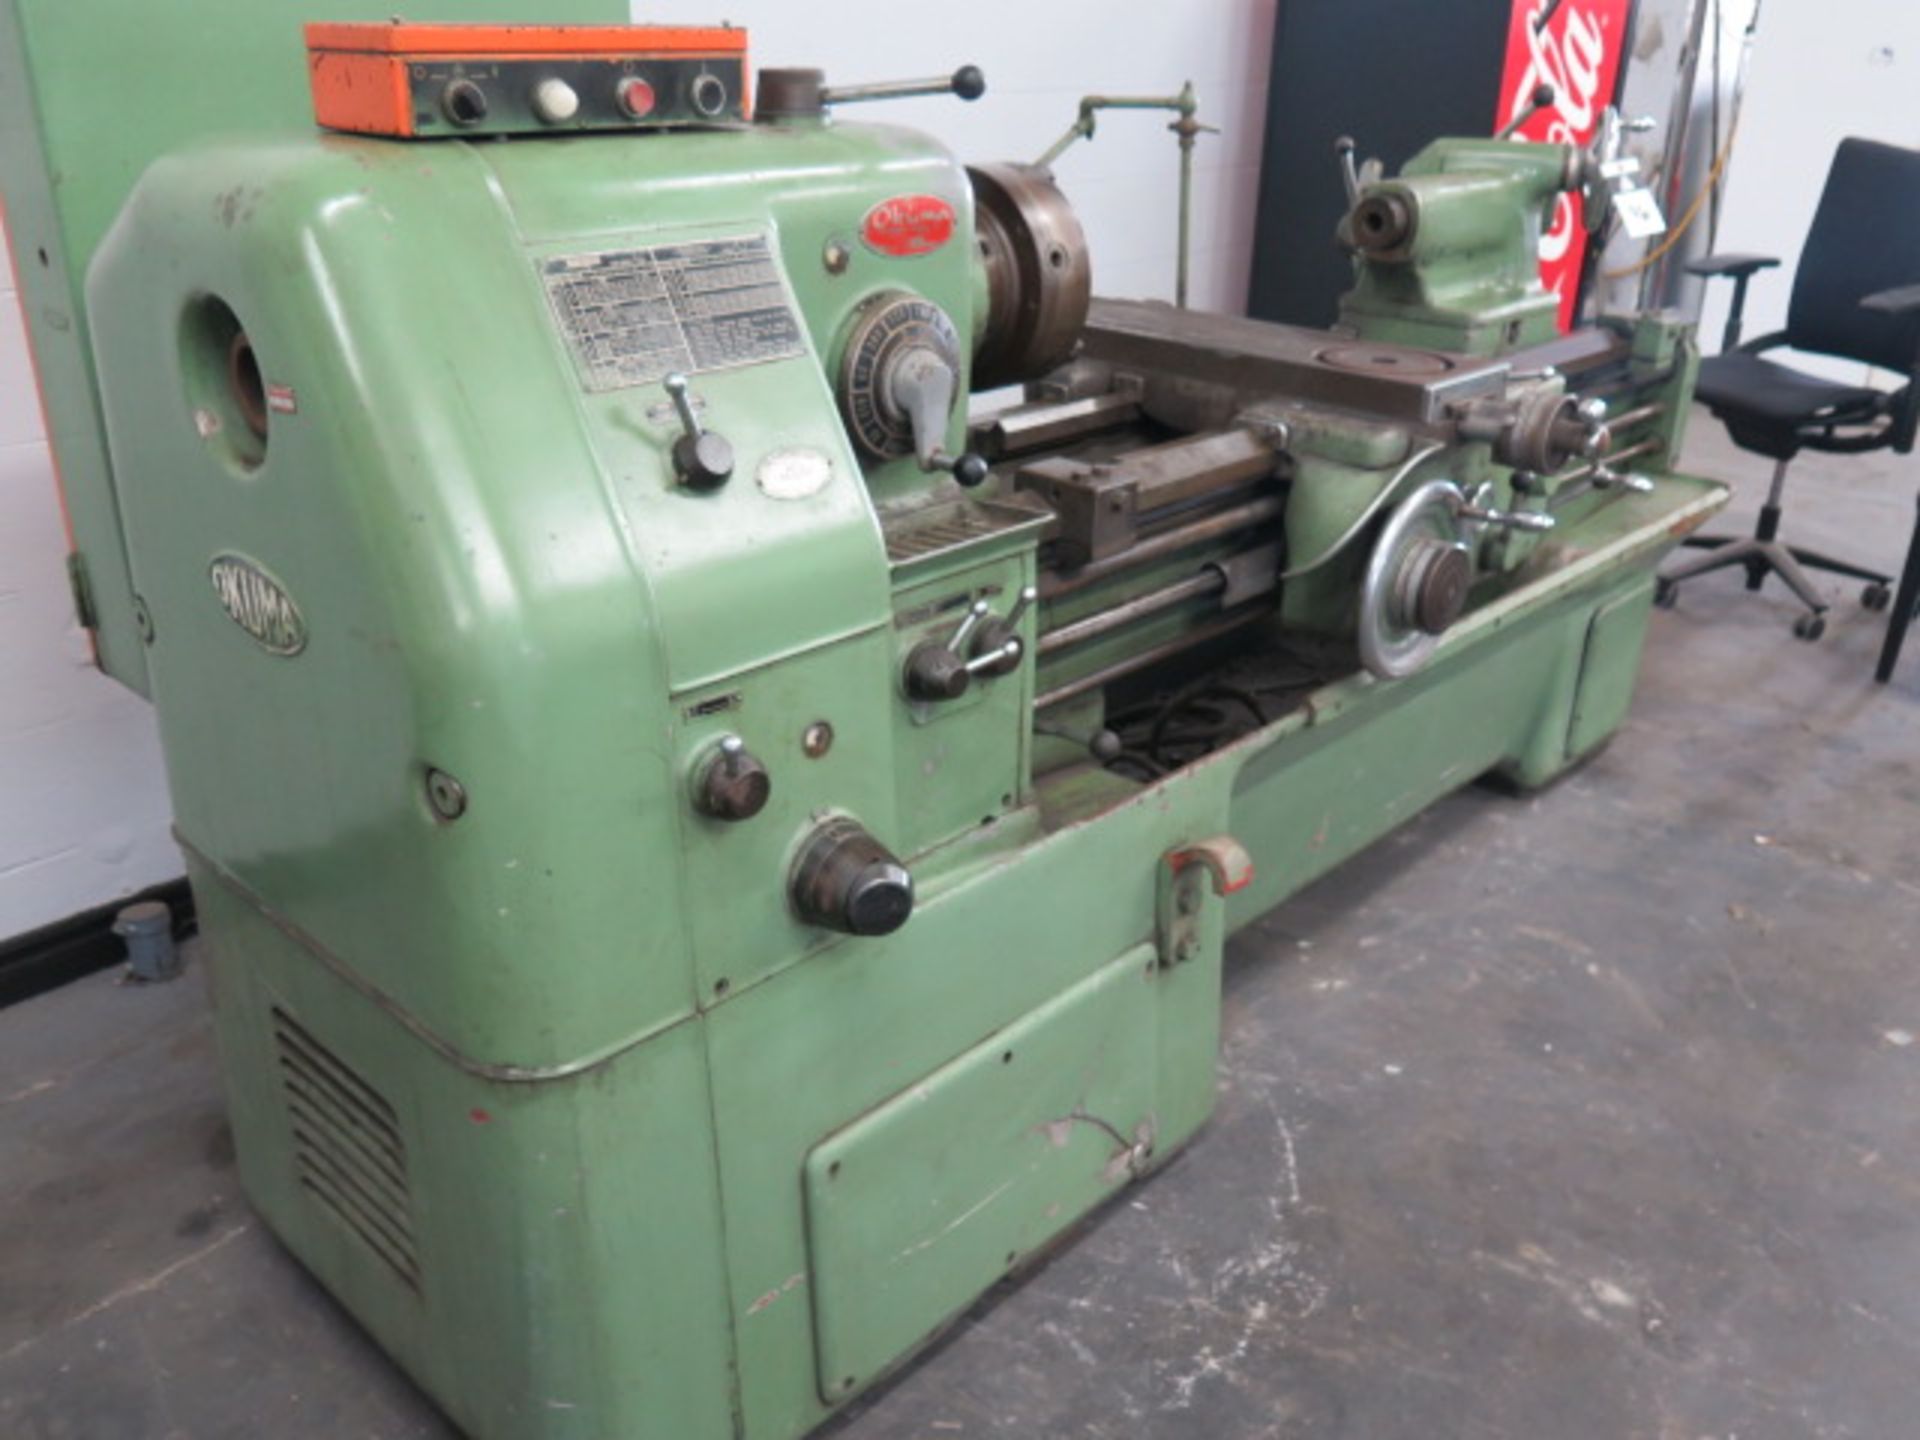 Okuma type LS Gap Bed Lathe (MISSING CROSS SLIDE ASSEMBLY) s/n 4707-3896 w/ SOLD AS IS - Image 3 of 13